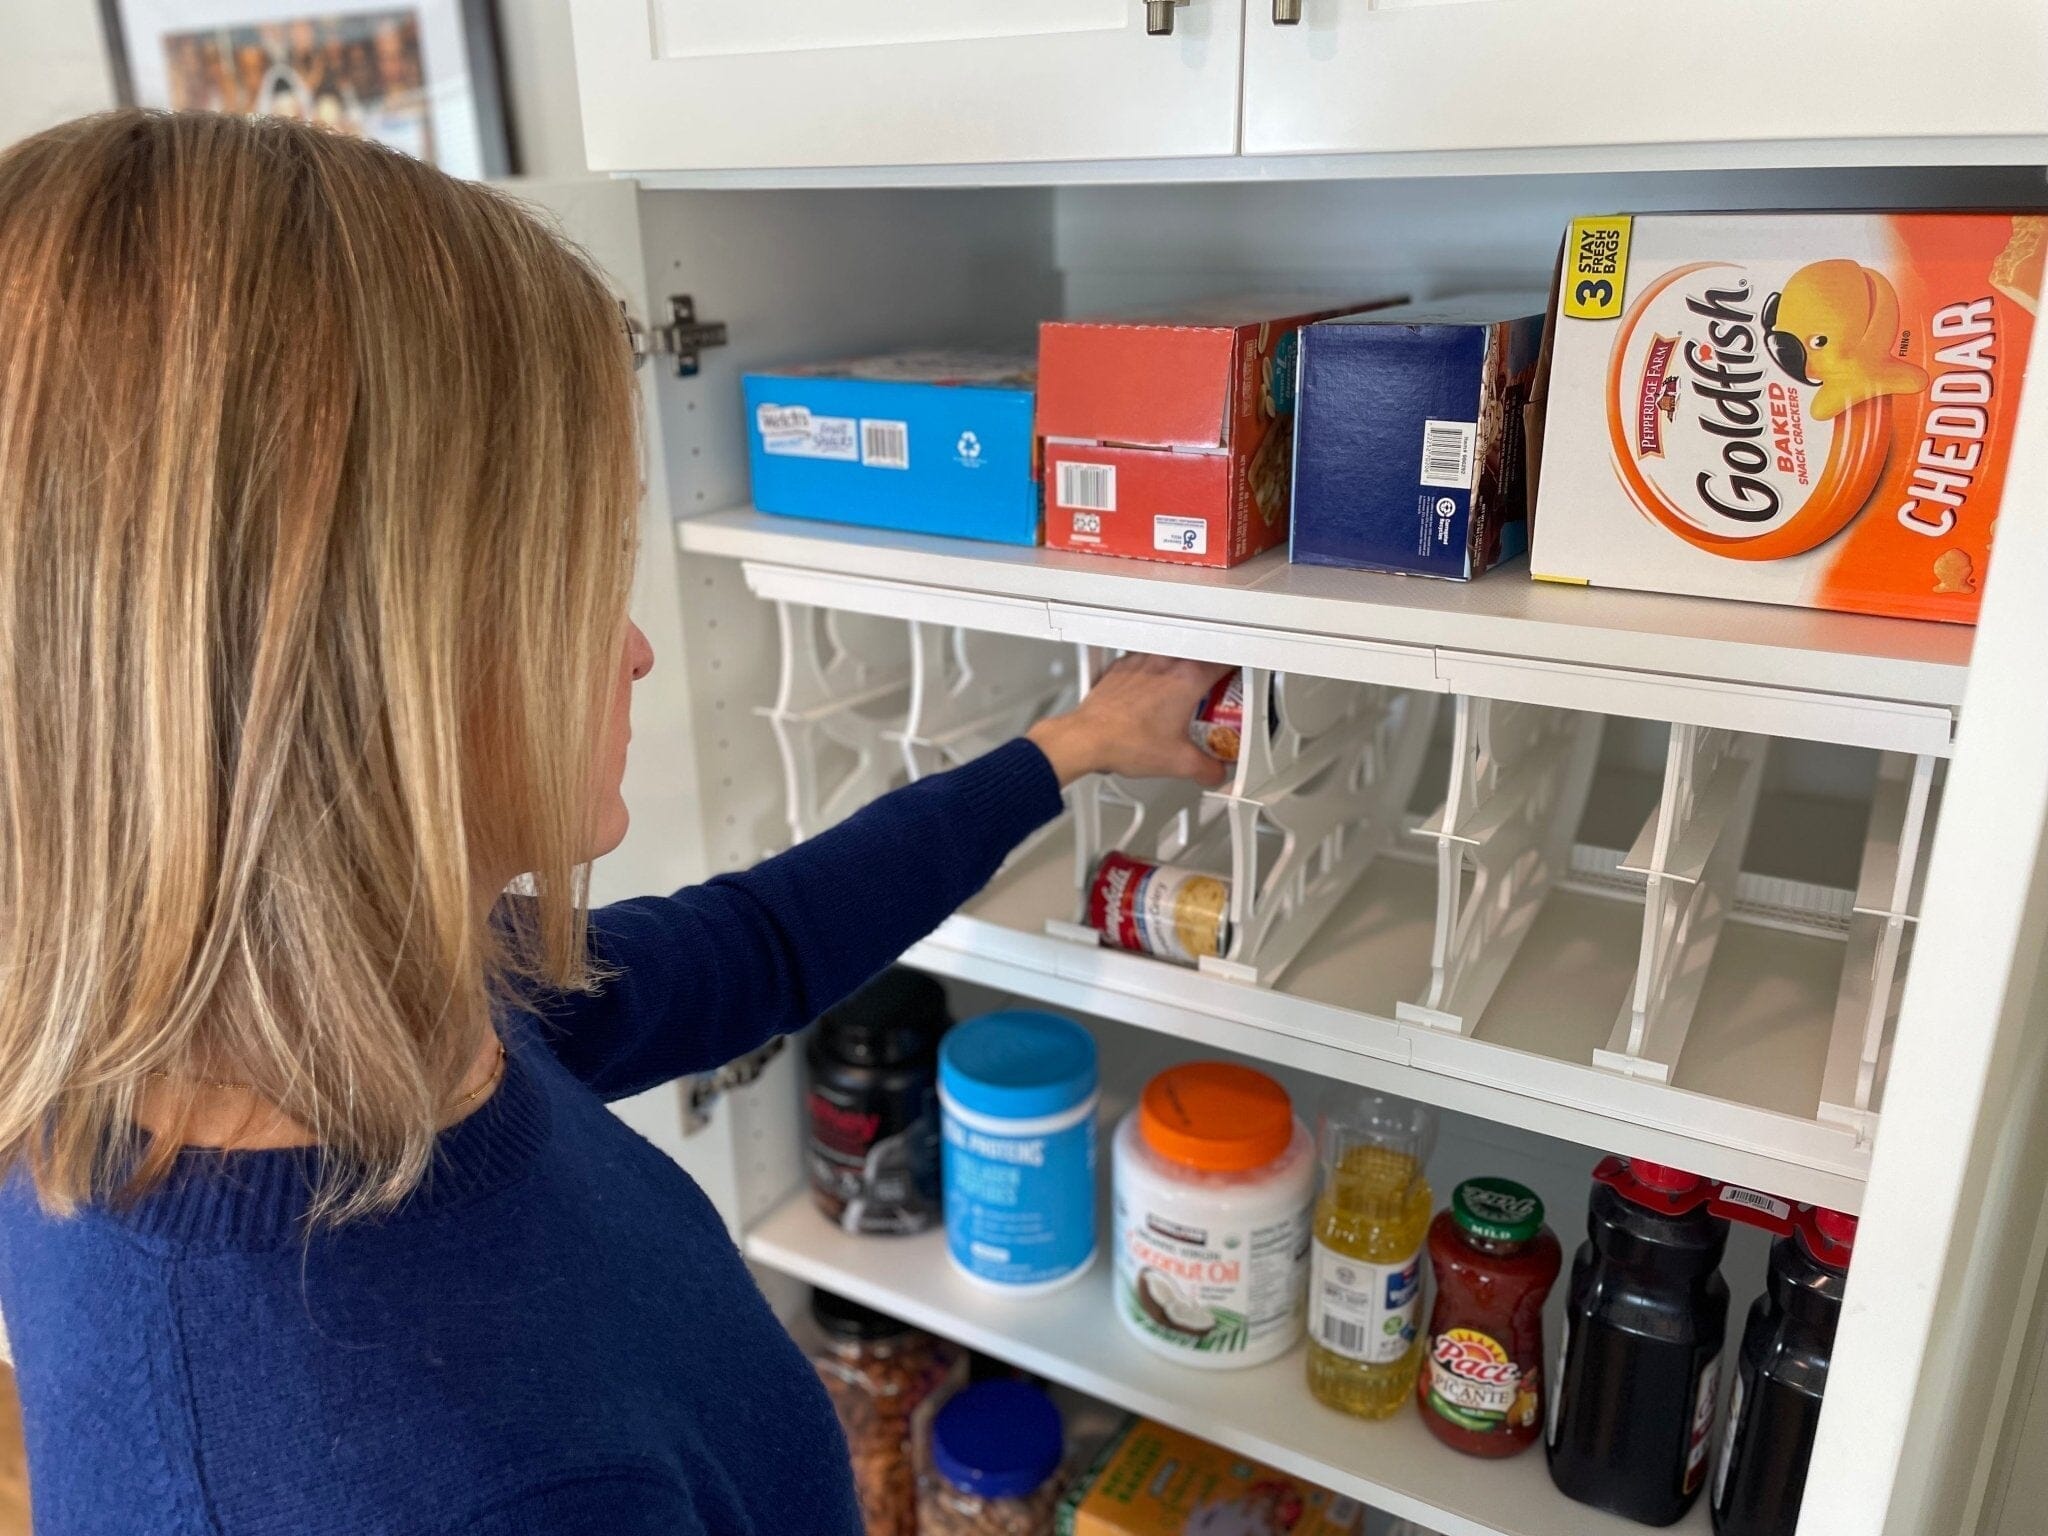 Building an Effective Canned Food Rotation Program for Home Food Storage